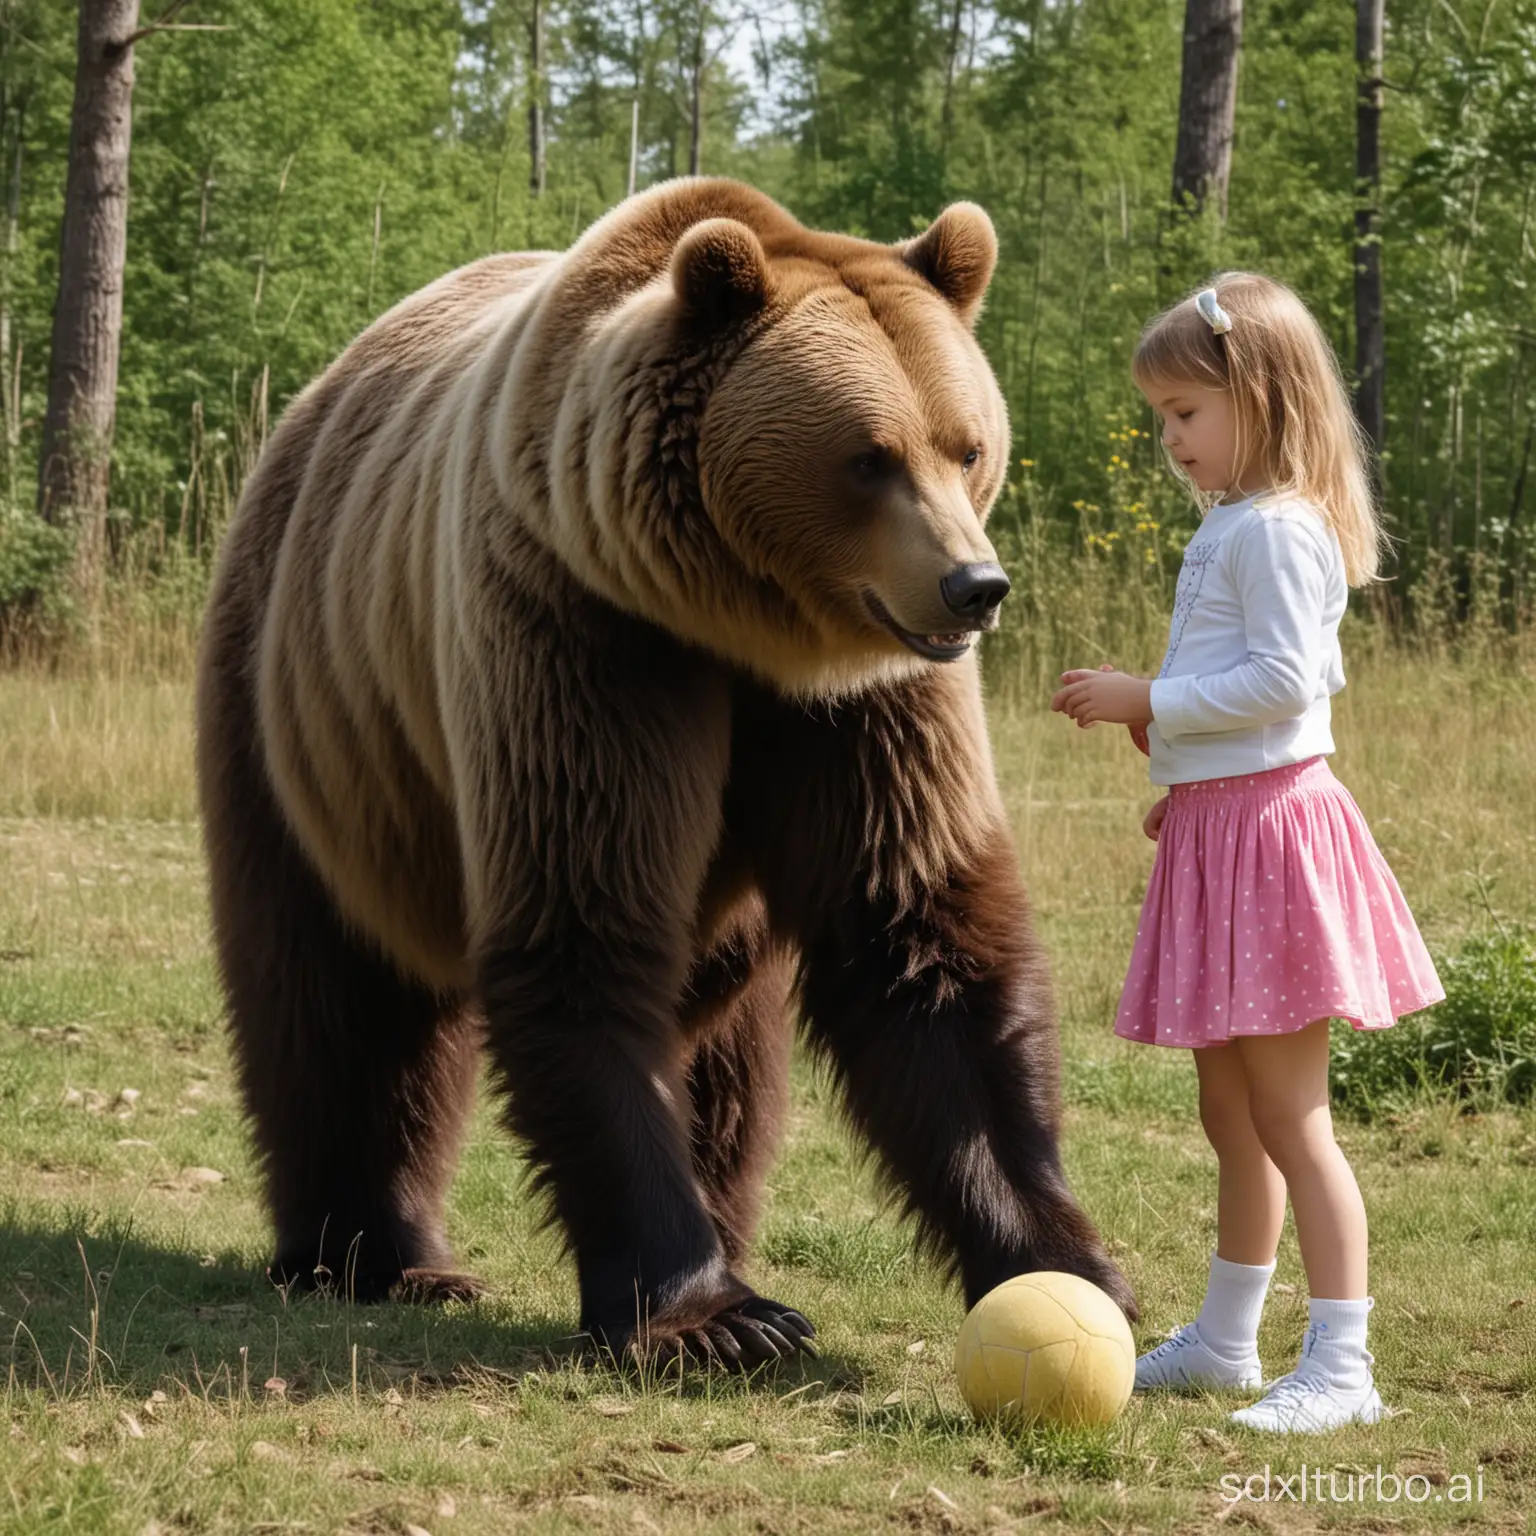 The bear and the girl Masha are playing with a ball.